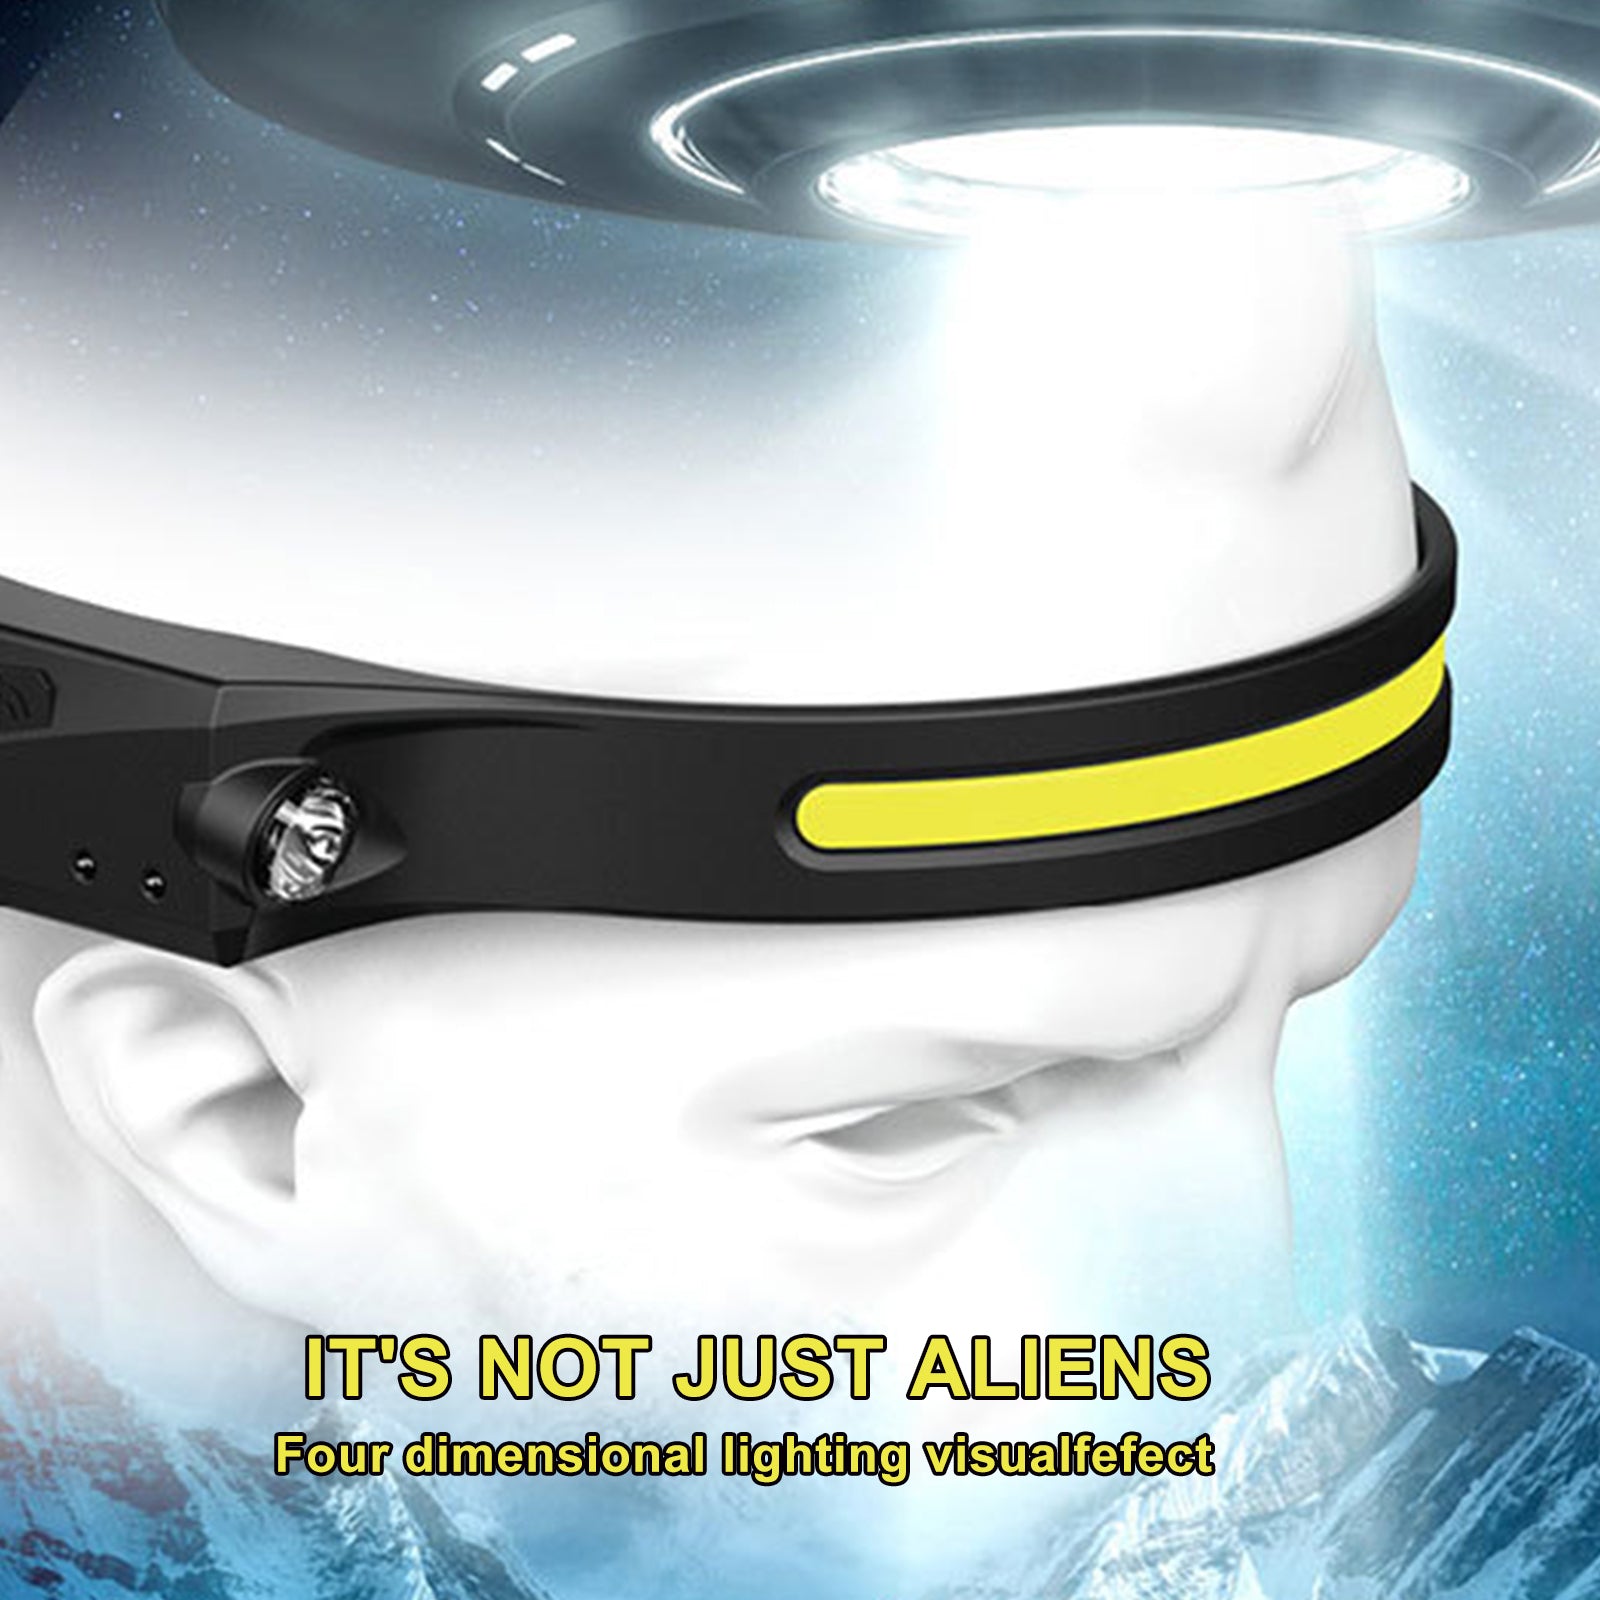 COB LED Induction Riding Headlamp Flashlight USB Rechargeable Waterproof Camping Headlight With All Perspectives Hunting Light